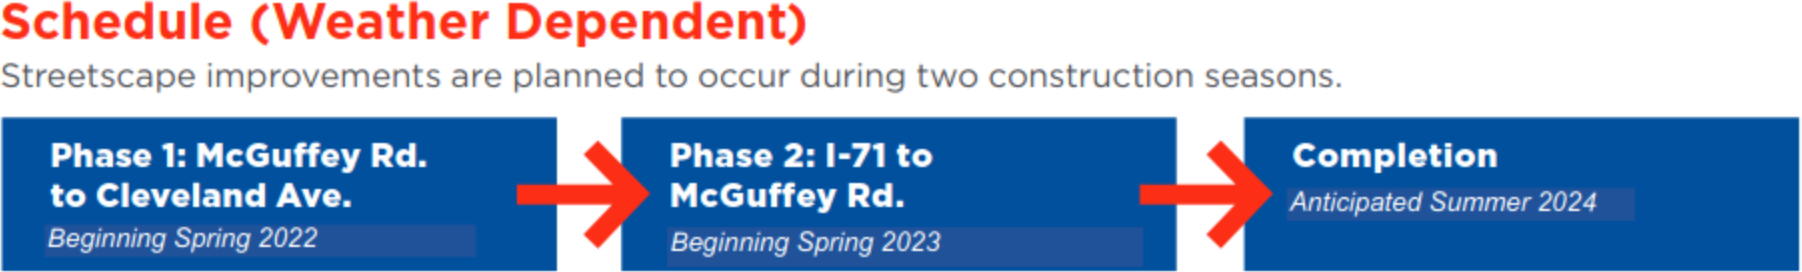 Phase 1: McGuffey Road to Cleveland Avenue, beginning spring 2022. Phase 2: I-71 to McGuffey Road, beginning spring 2023. Completion anticipated summer 2024.